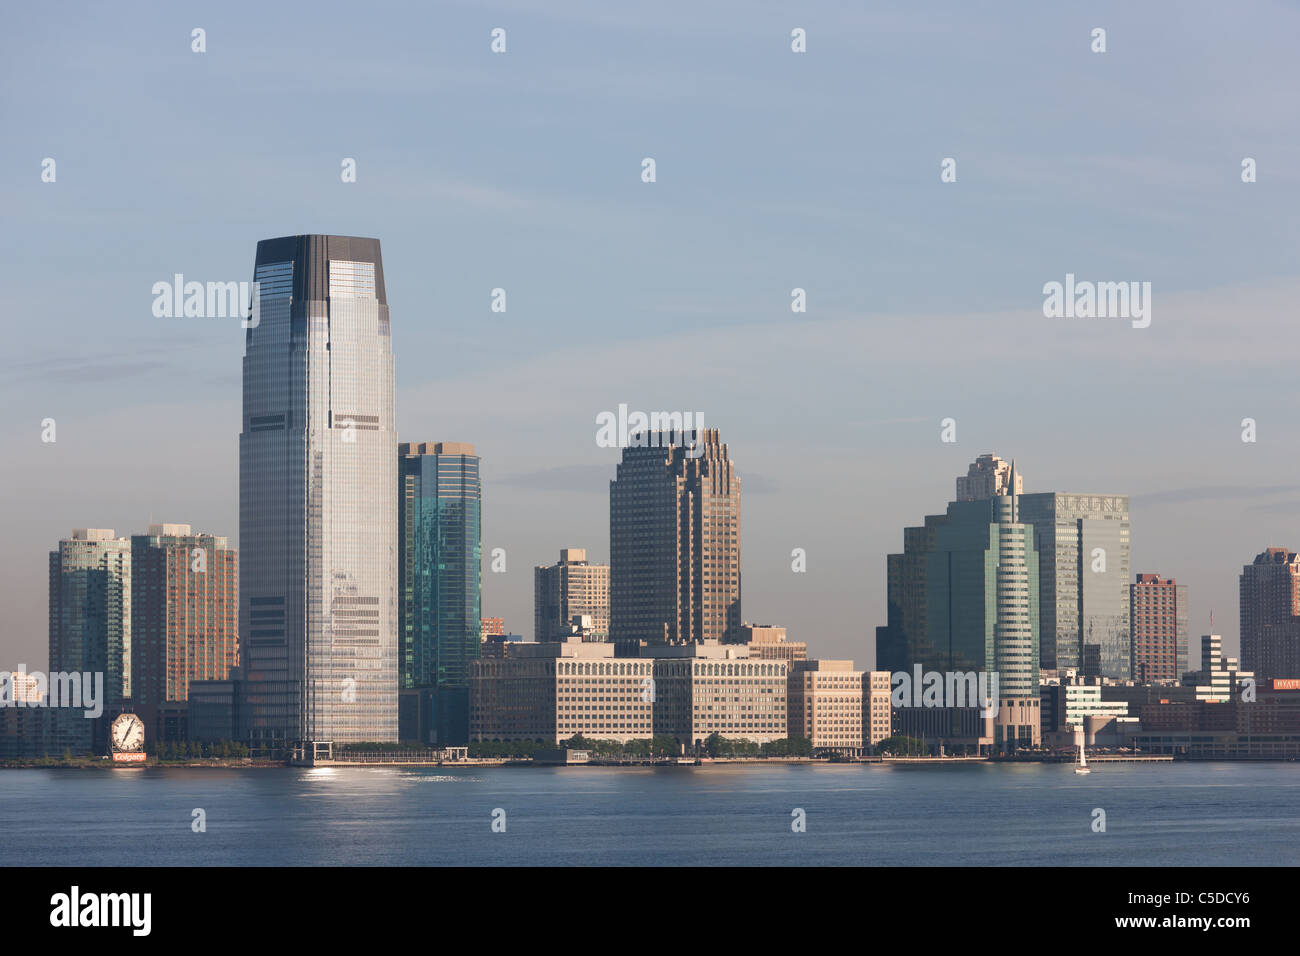 The Goldman Sachs Tower and Colgate-Palmolive clock along with other buildings of the skyline of Jersey City, New Jersey. Stock Photo